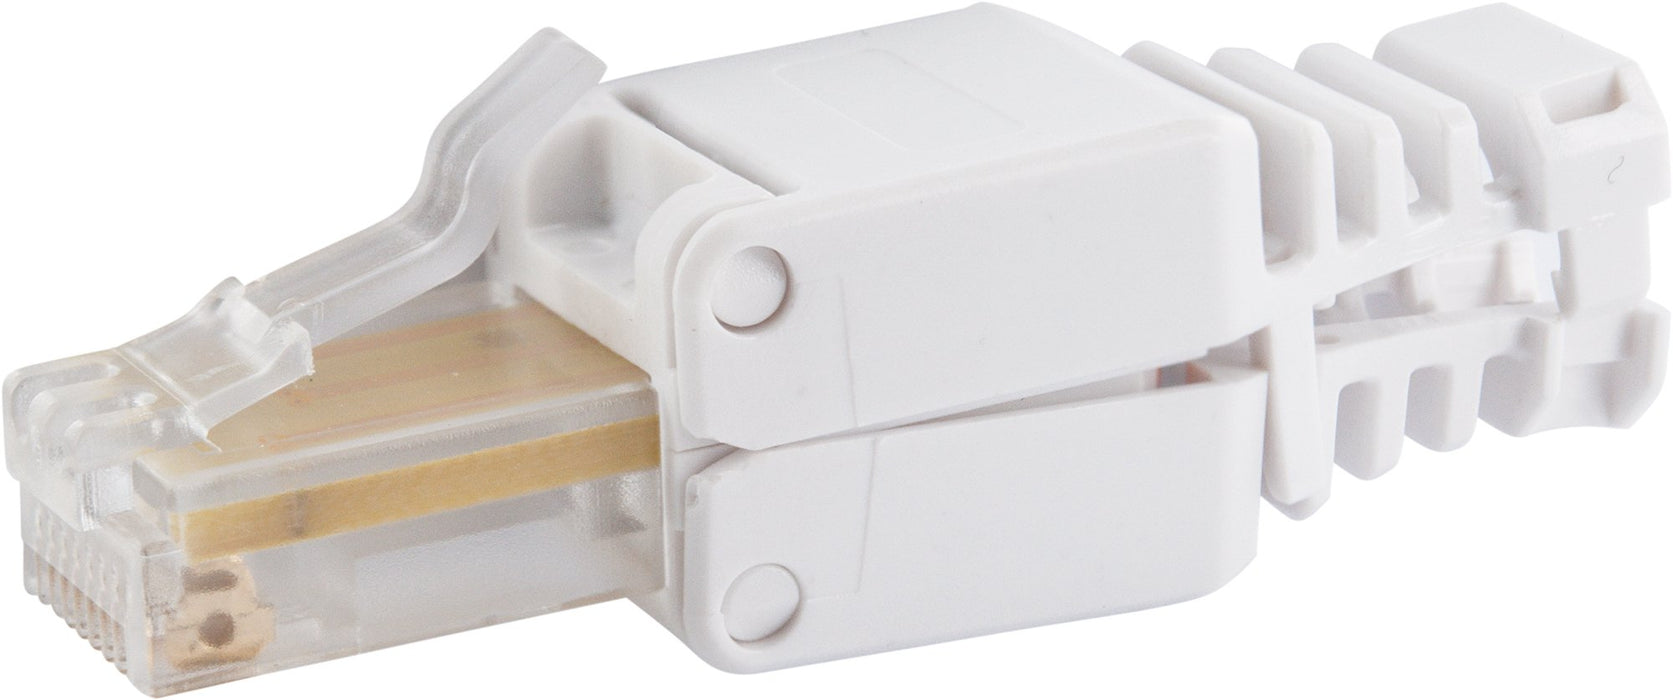 CAT 5e network connector, set of 2